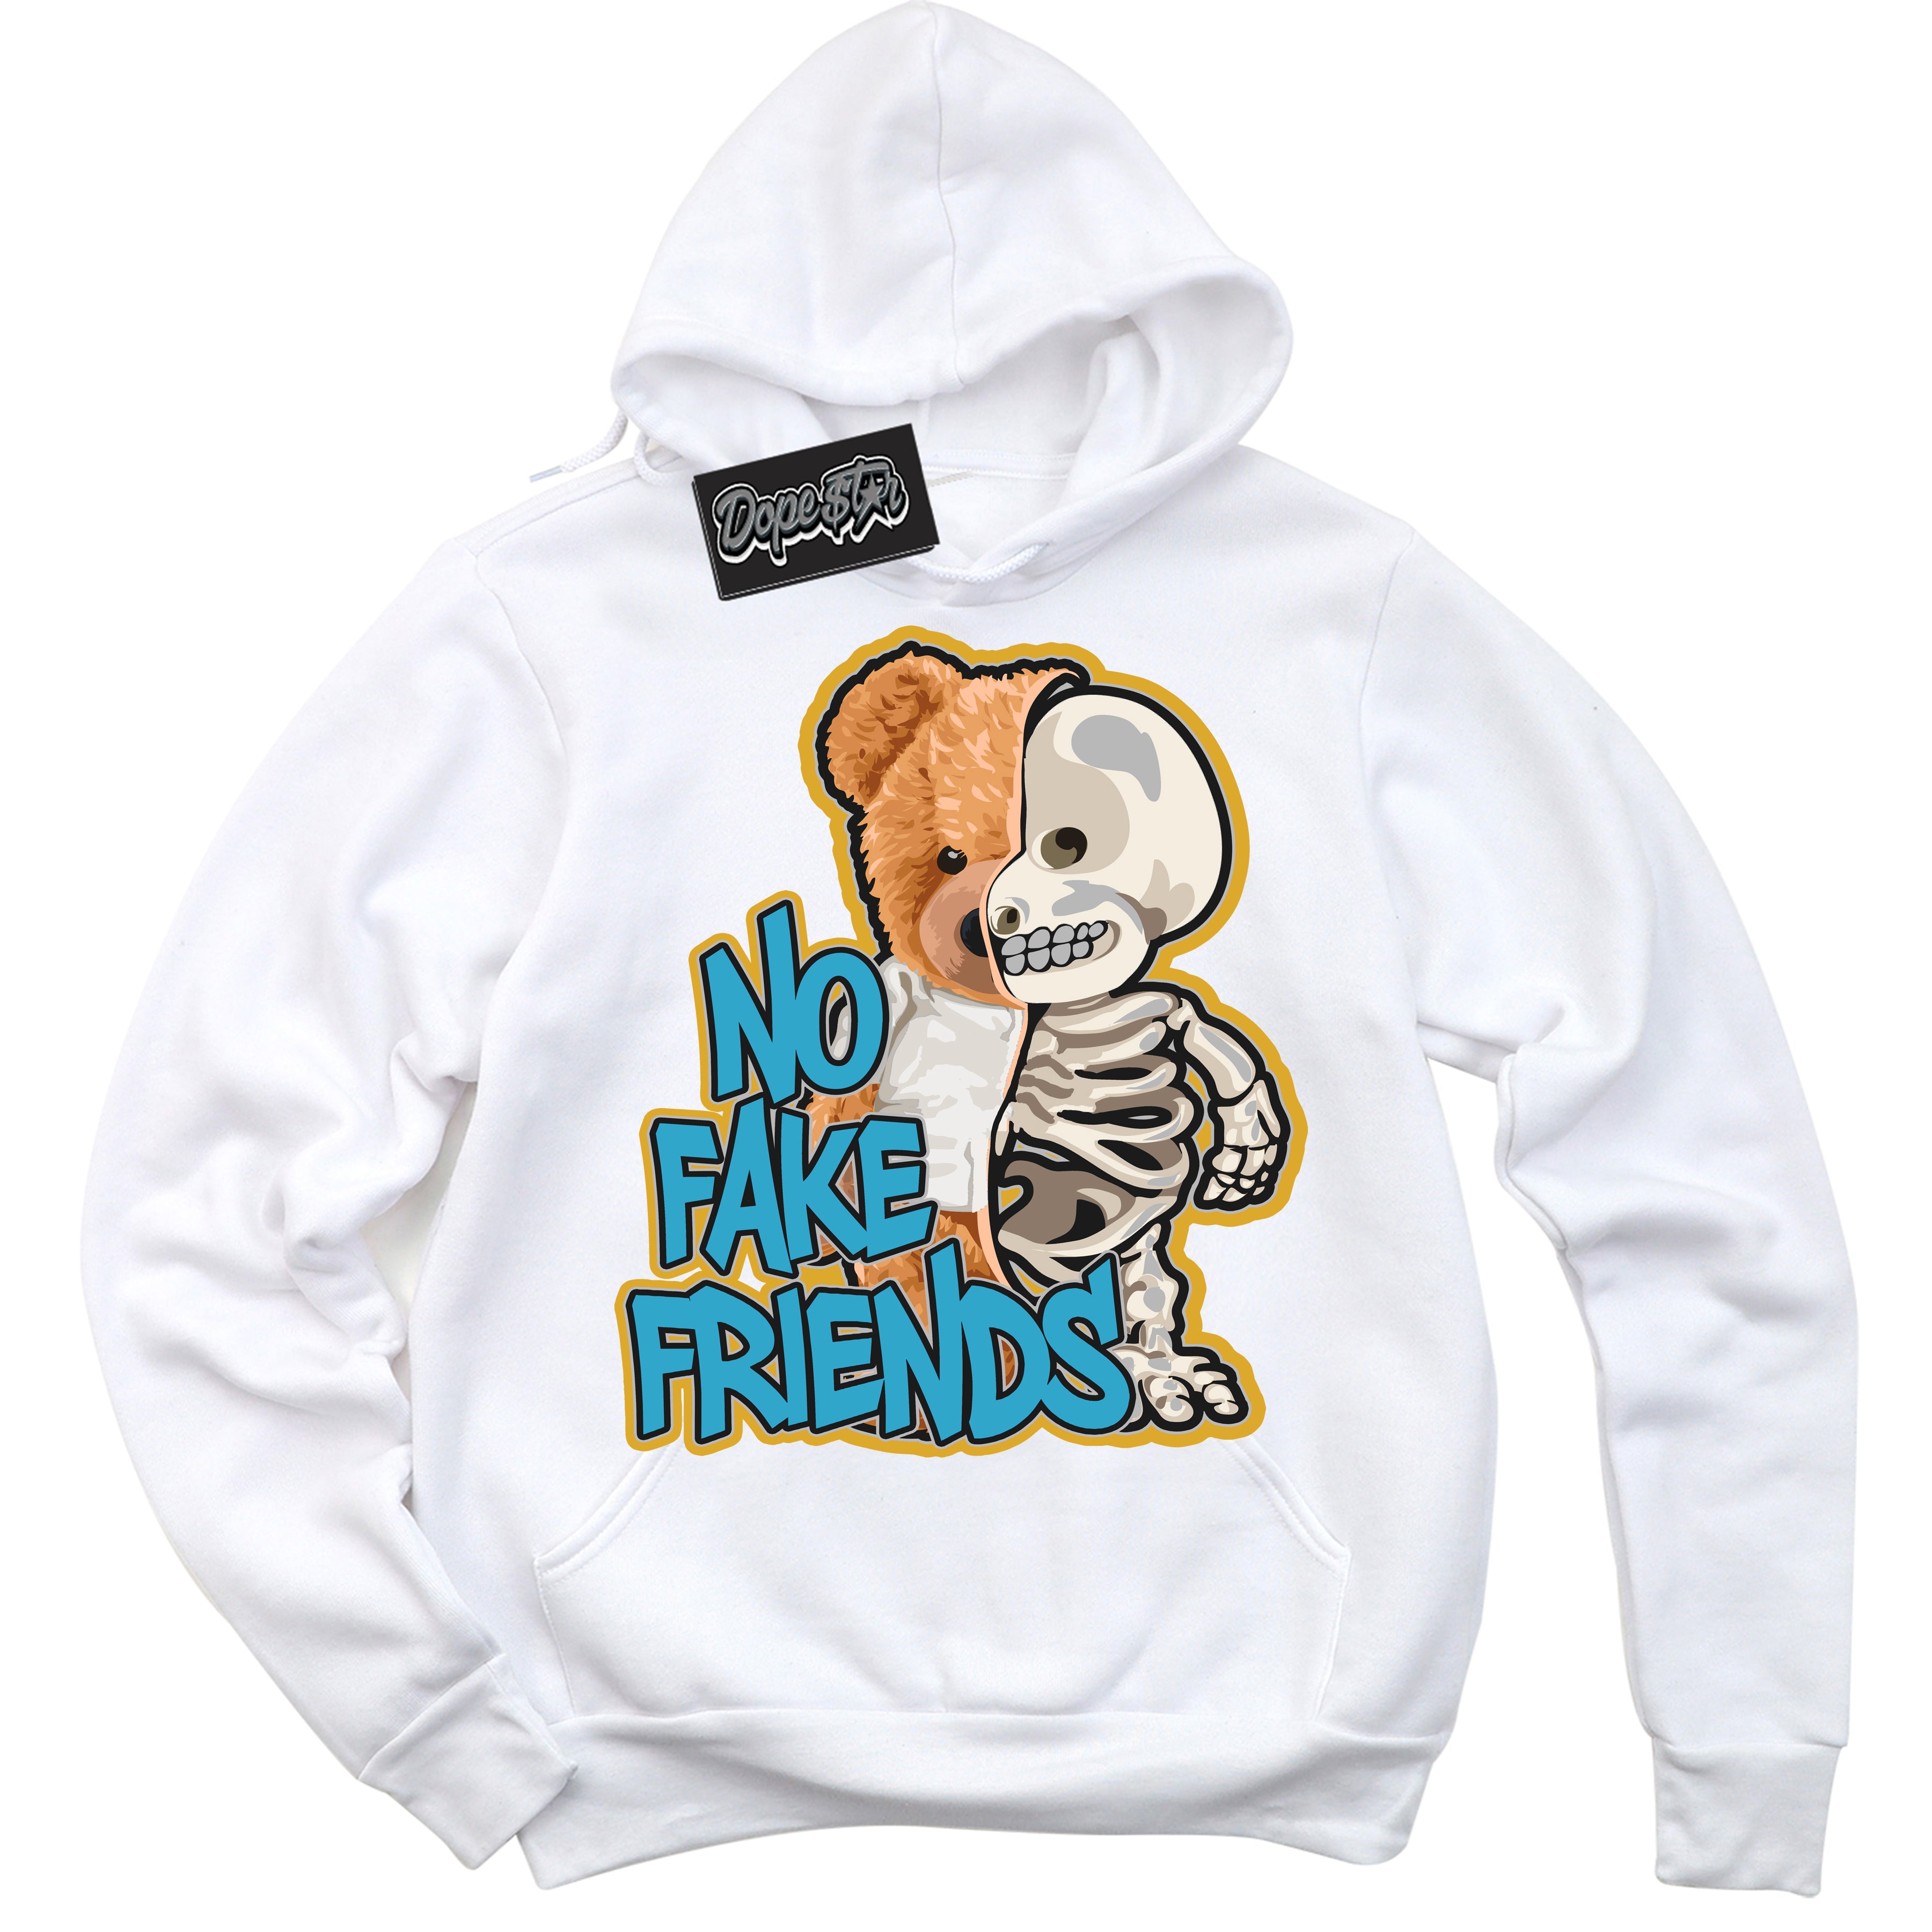 Cool White Hoodie with “ No Fake Friends ”  design that Perfectly Matches Aqua 5s Sneakers.